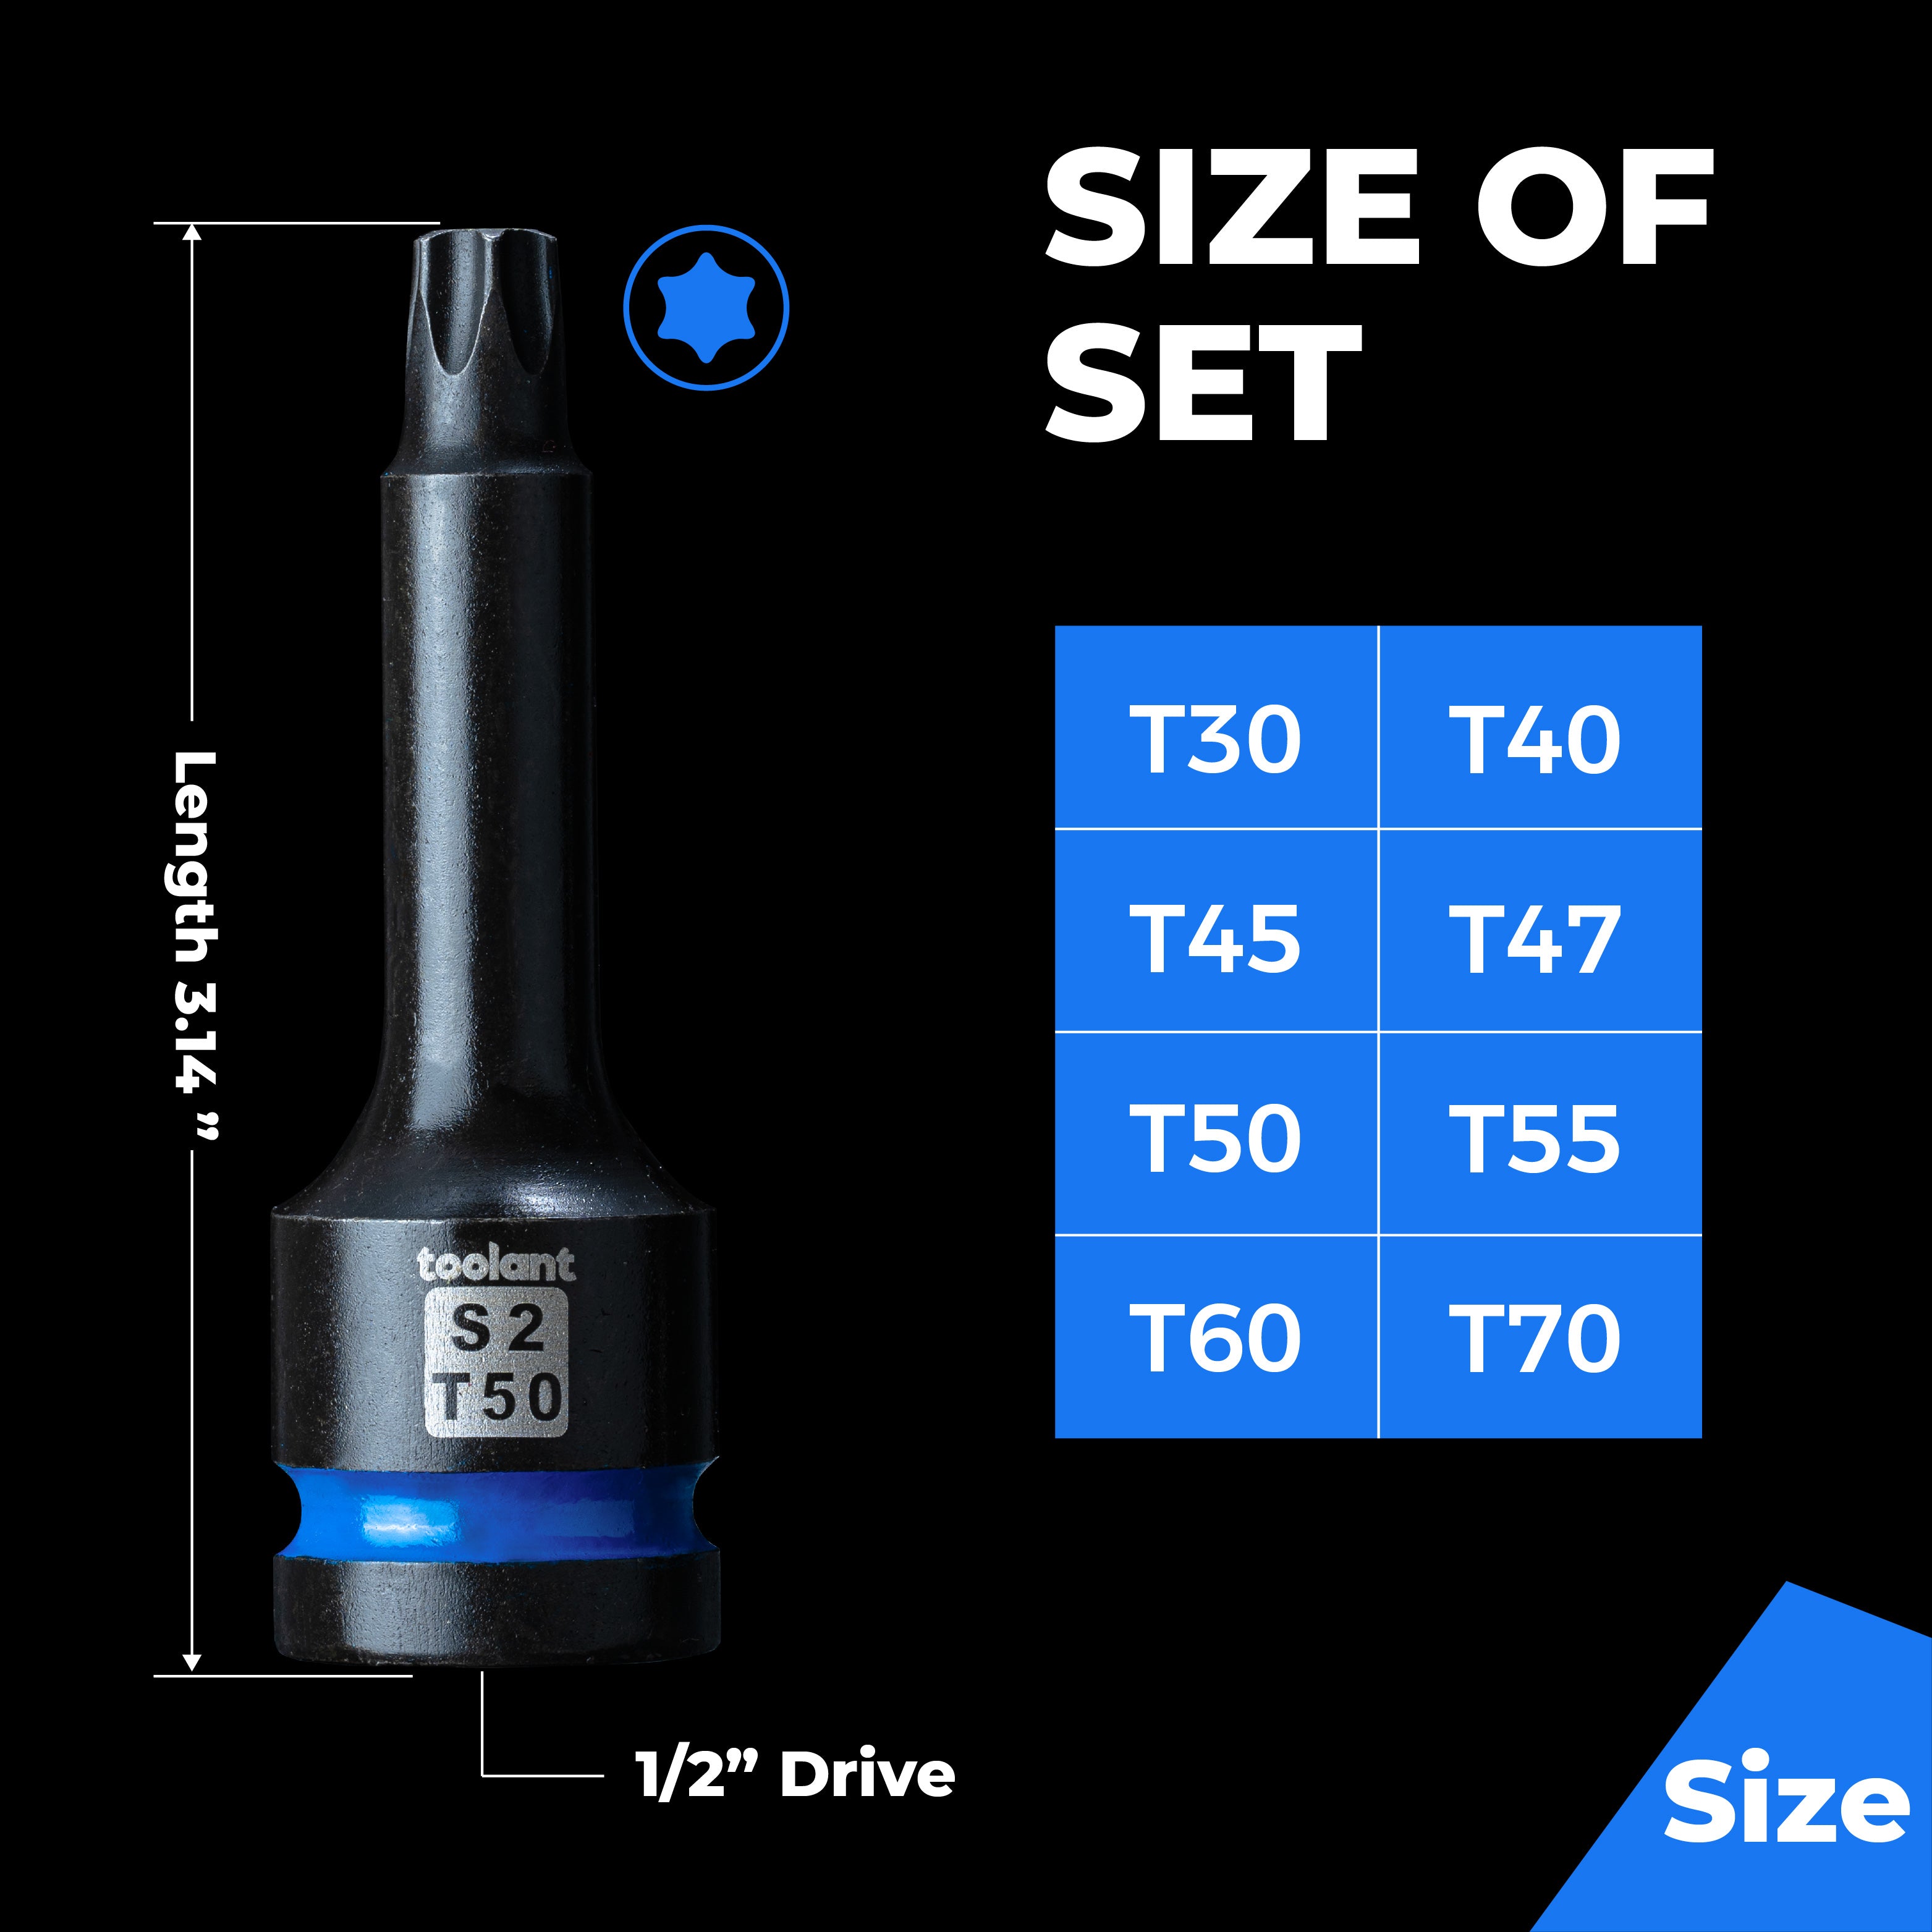 Torx Impact Bit Socket Set, made with 1/2" S2 Steel, for Professional Mechanic & Automotive Repair